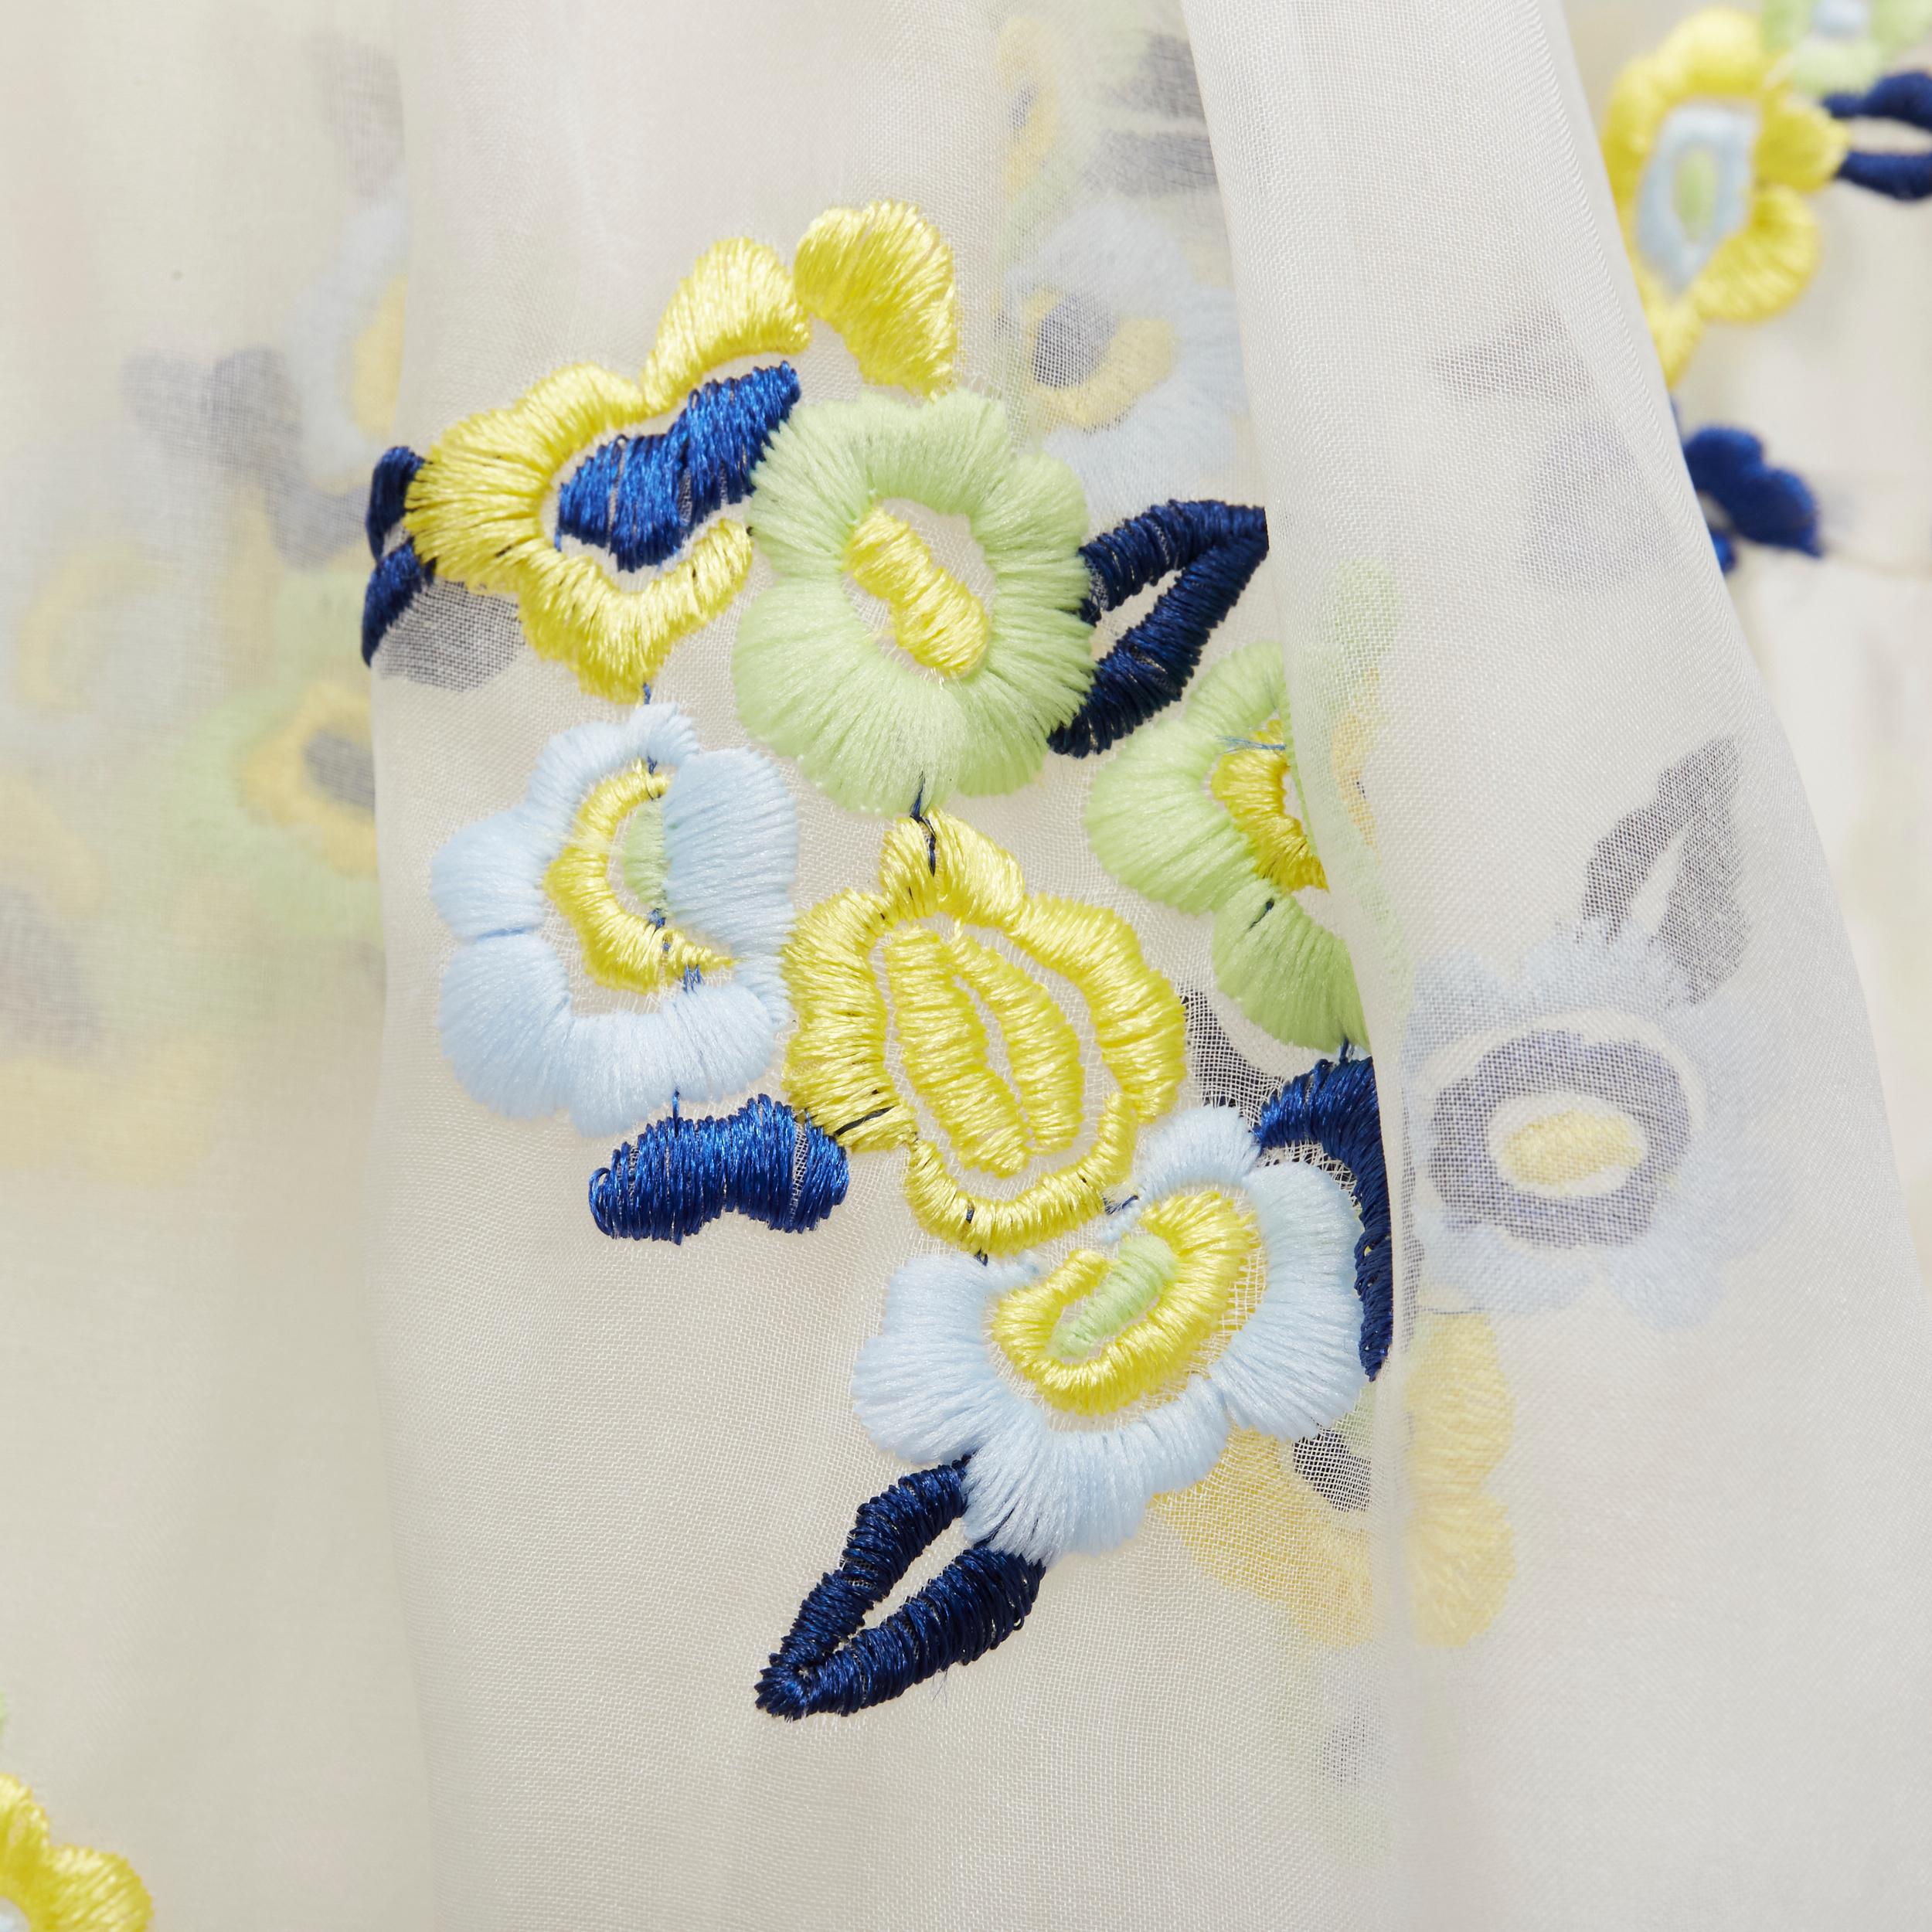 CECILIE BAHNSEN Runway white blue yellow floral embroidery sheer puff dress XS 
Reference: LNKO/A01848 
Brand: Cecilie Bahnsen 
Designer: Cecilie Bahnsen 
Collection: Fall/Winter 2019 Runway 
As seen on: Korean Pop star - IU 
Material: Silk 
Color: